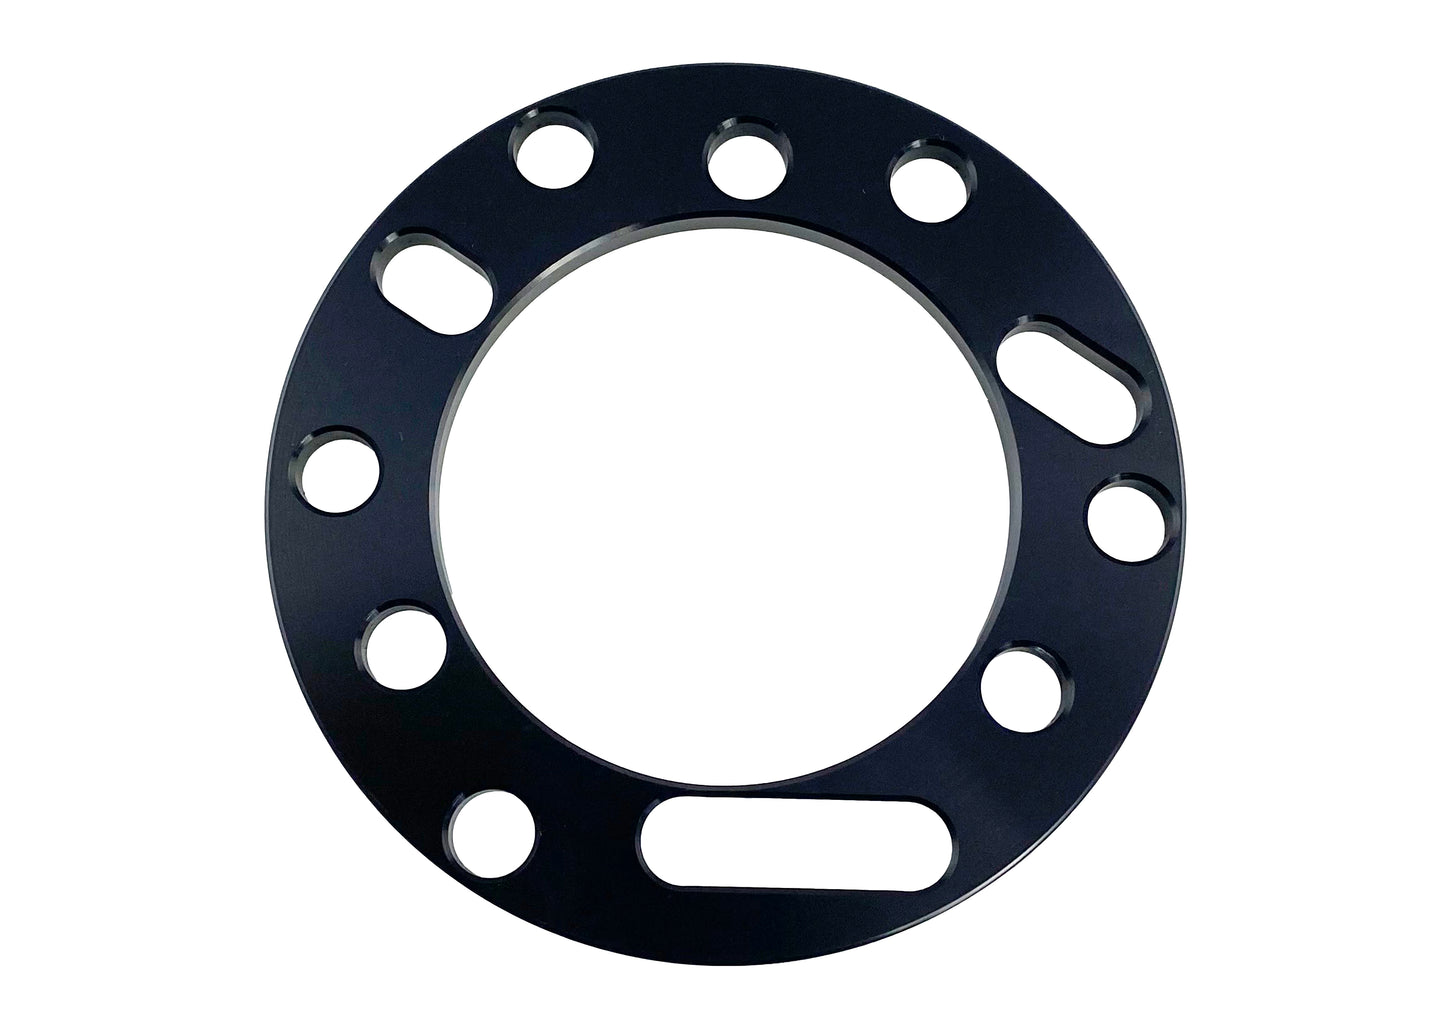 Strut - Spacer (6mm Height)